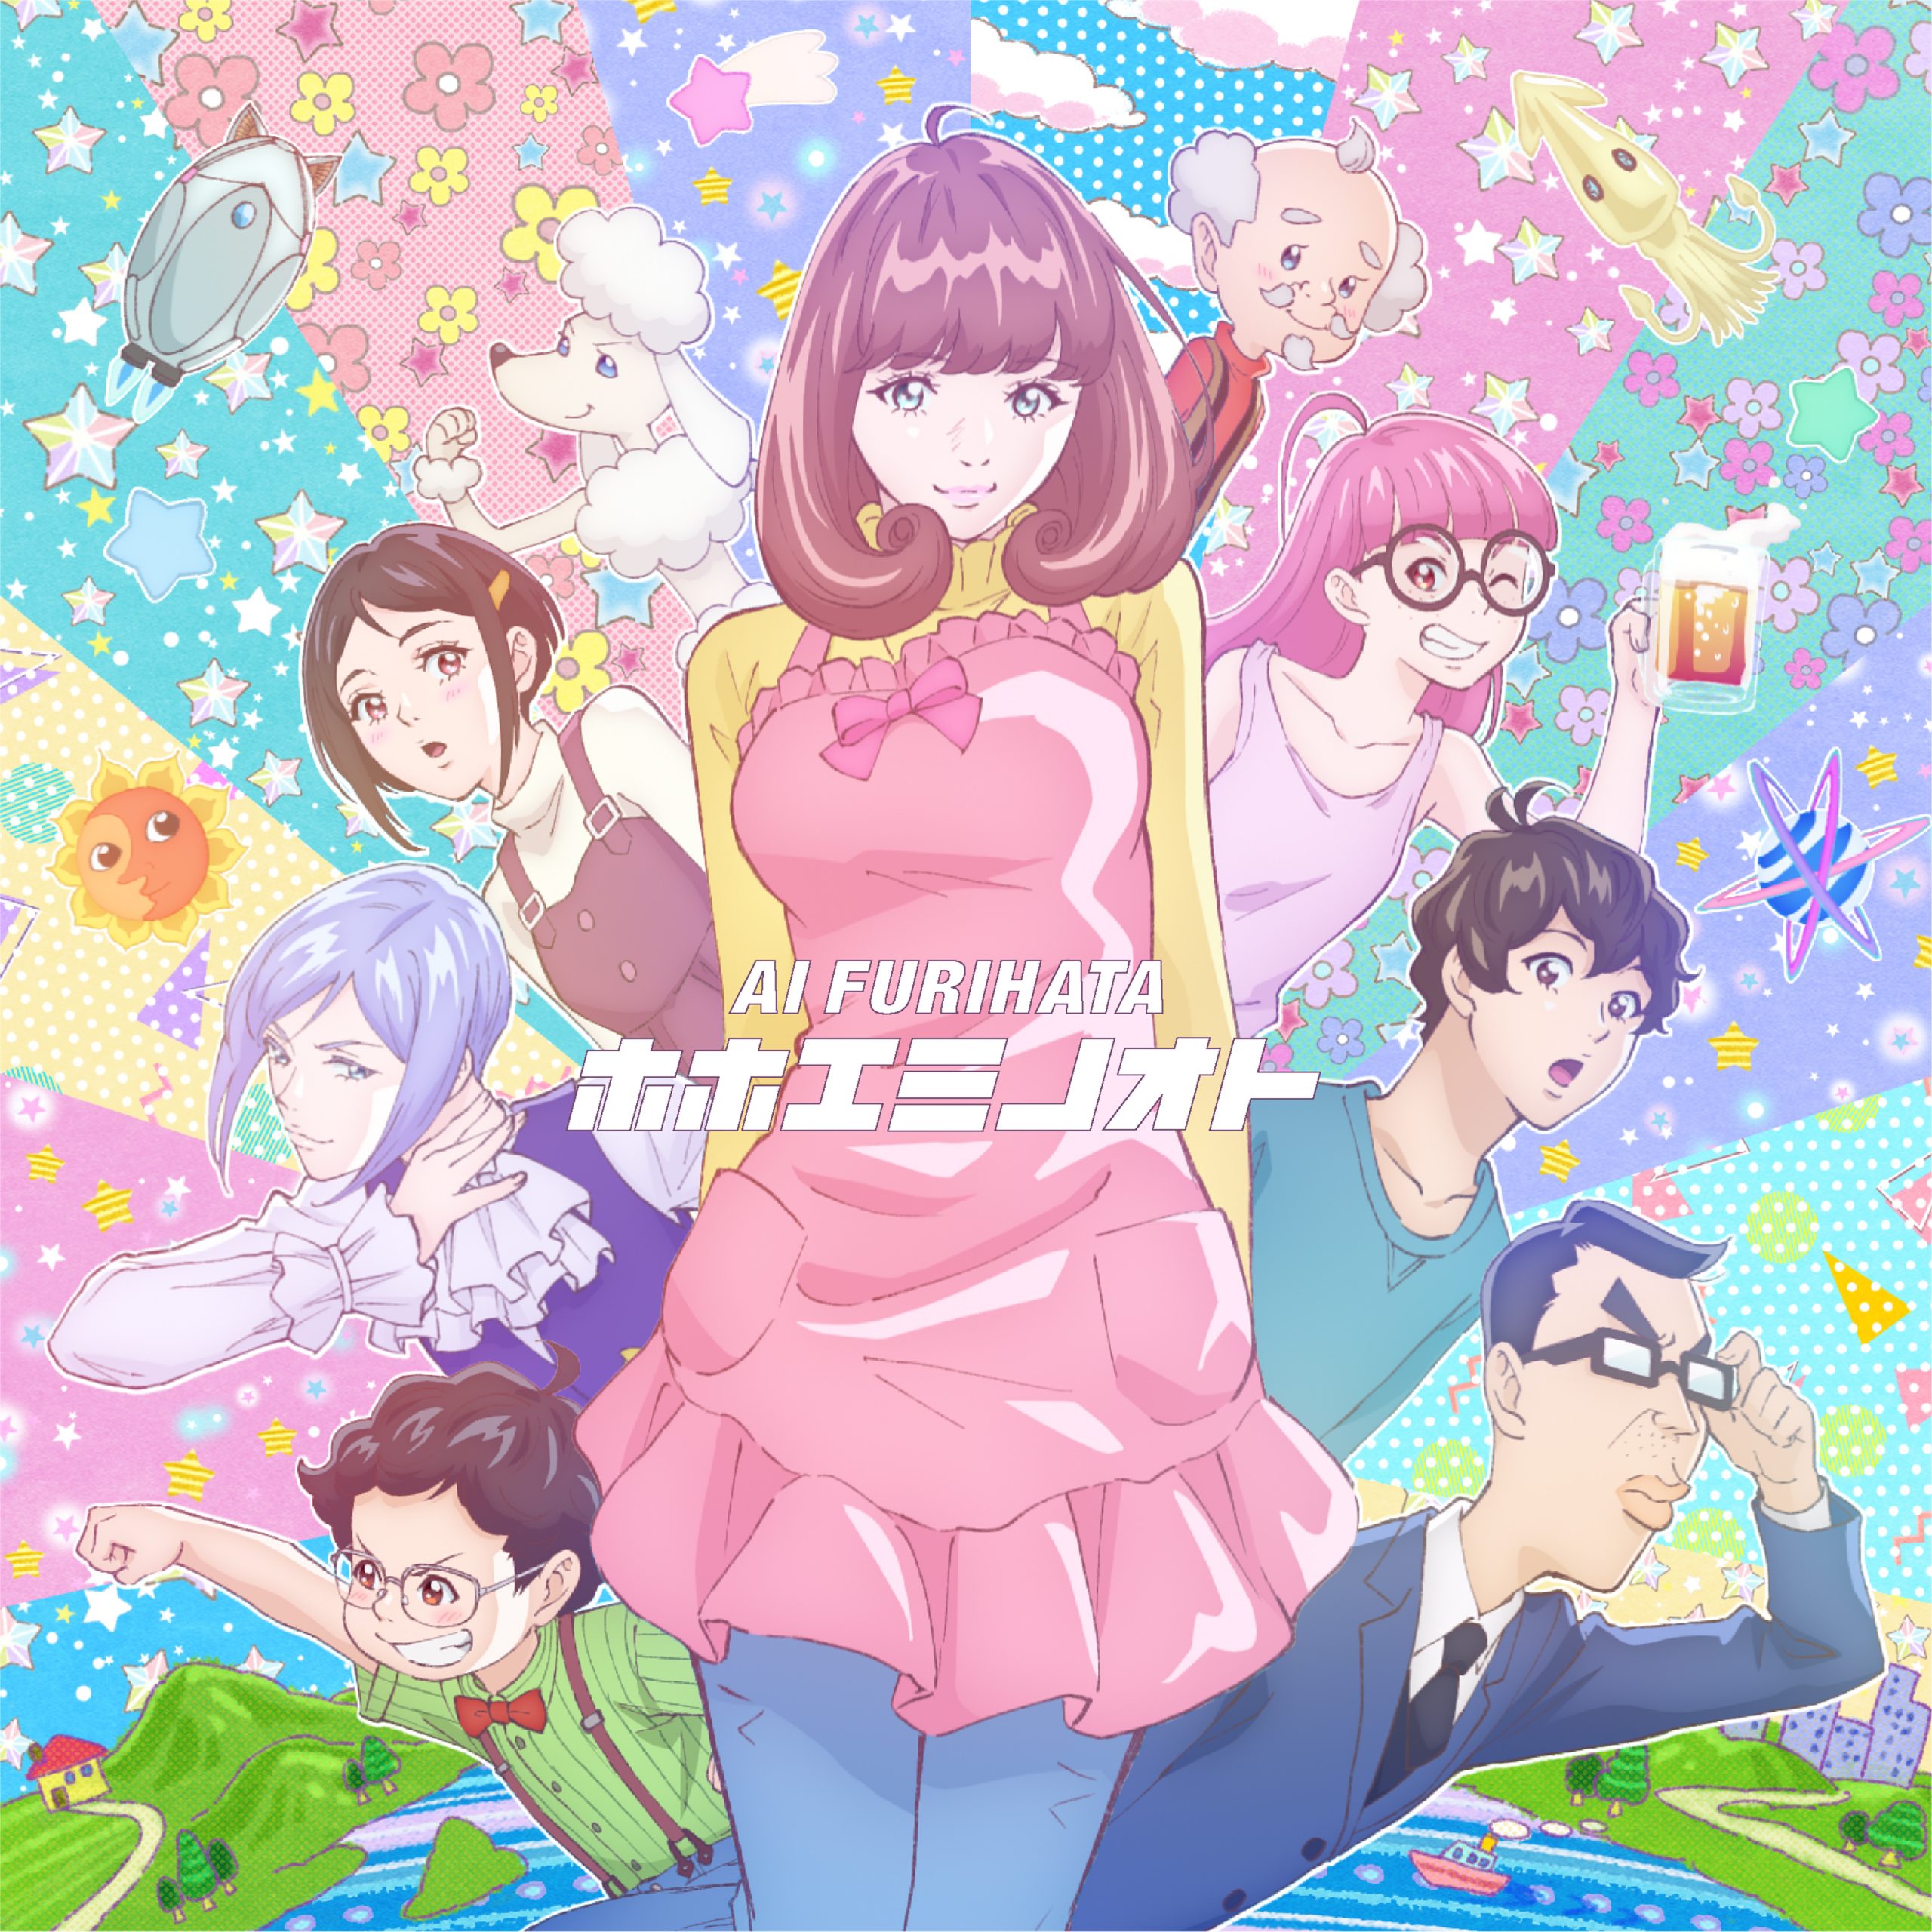 Ai-Furihata-Artist-Photo Ai Furihata’s First-Ever Anime Tie-Up Song! 3rd Single “Hohoemi no Oto” To Be Released on May 29!